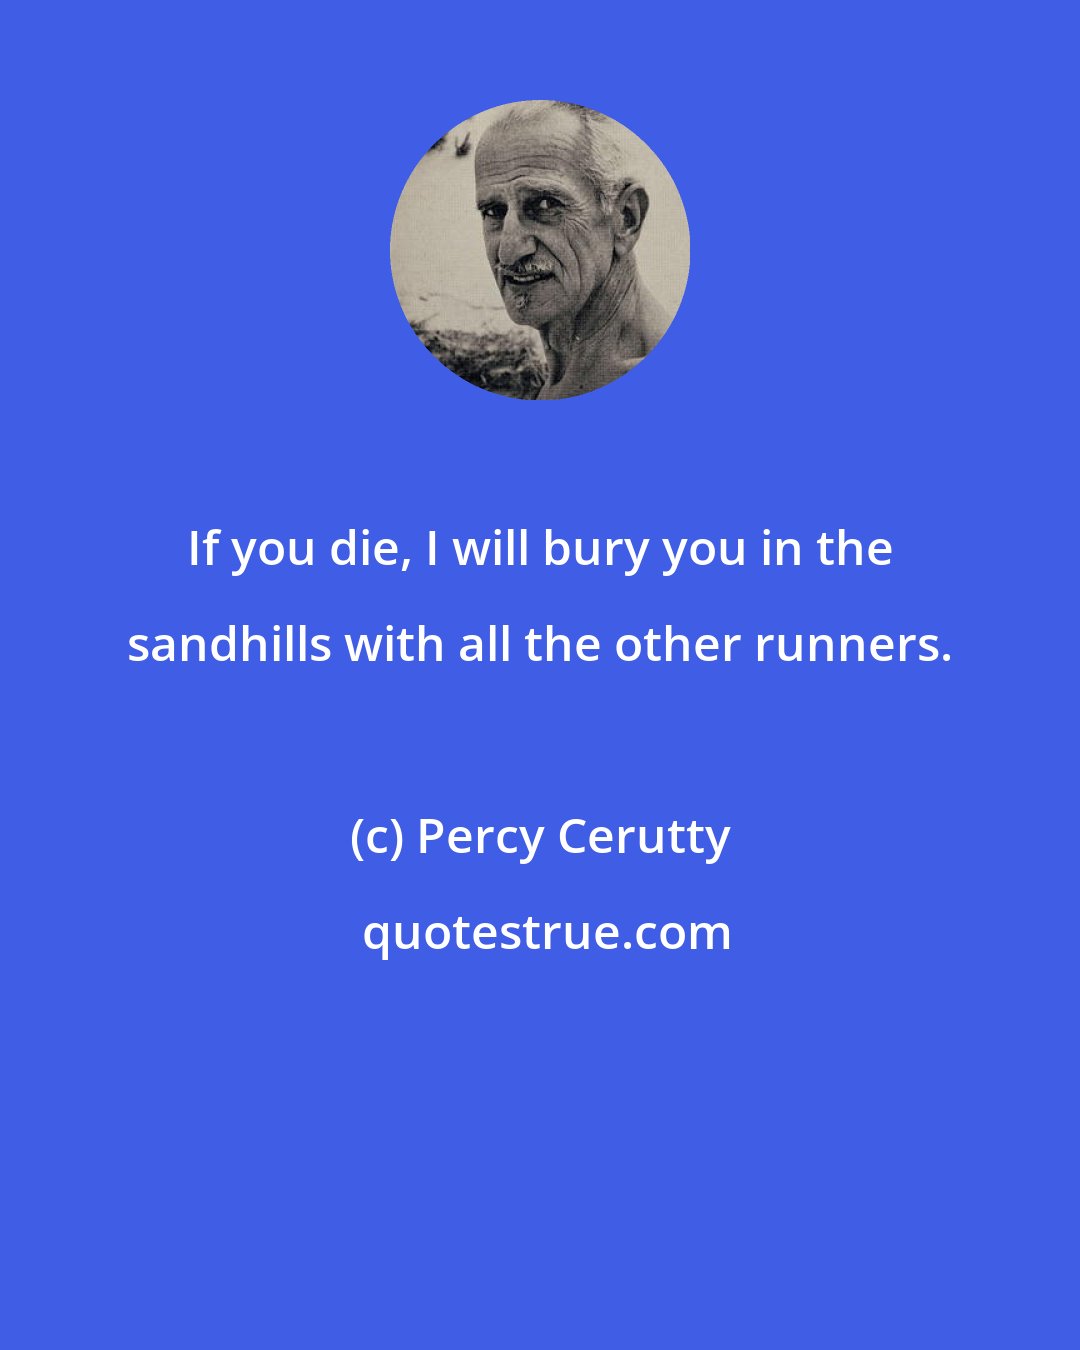 Percy Cerutty: If you die, I will bury you in the sandhills with all the other runners.